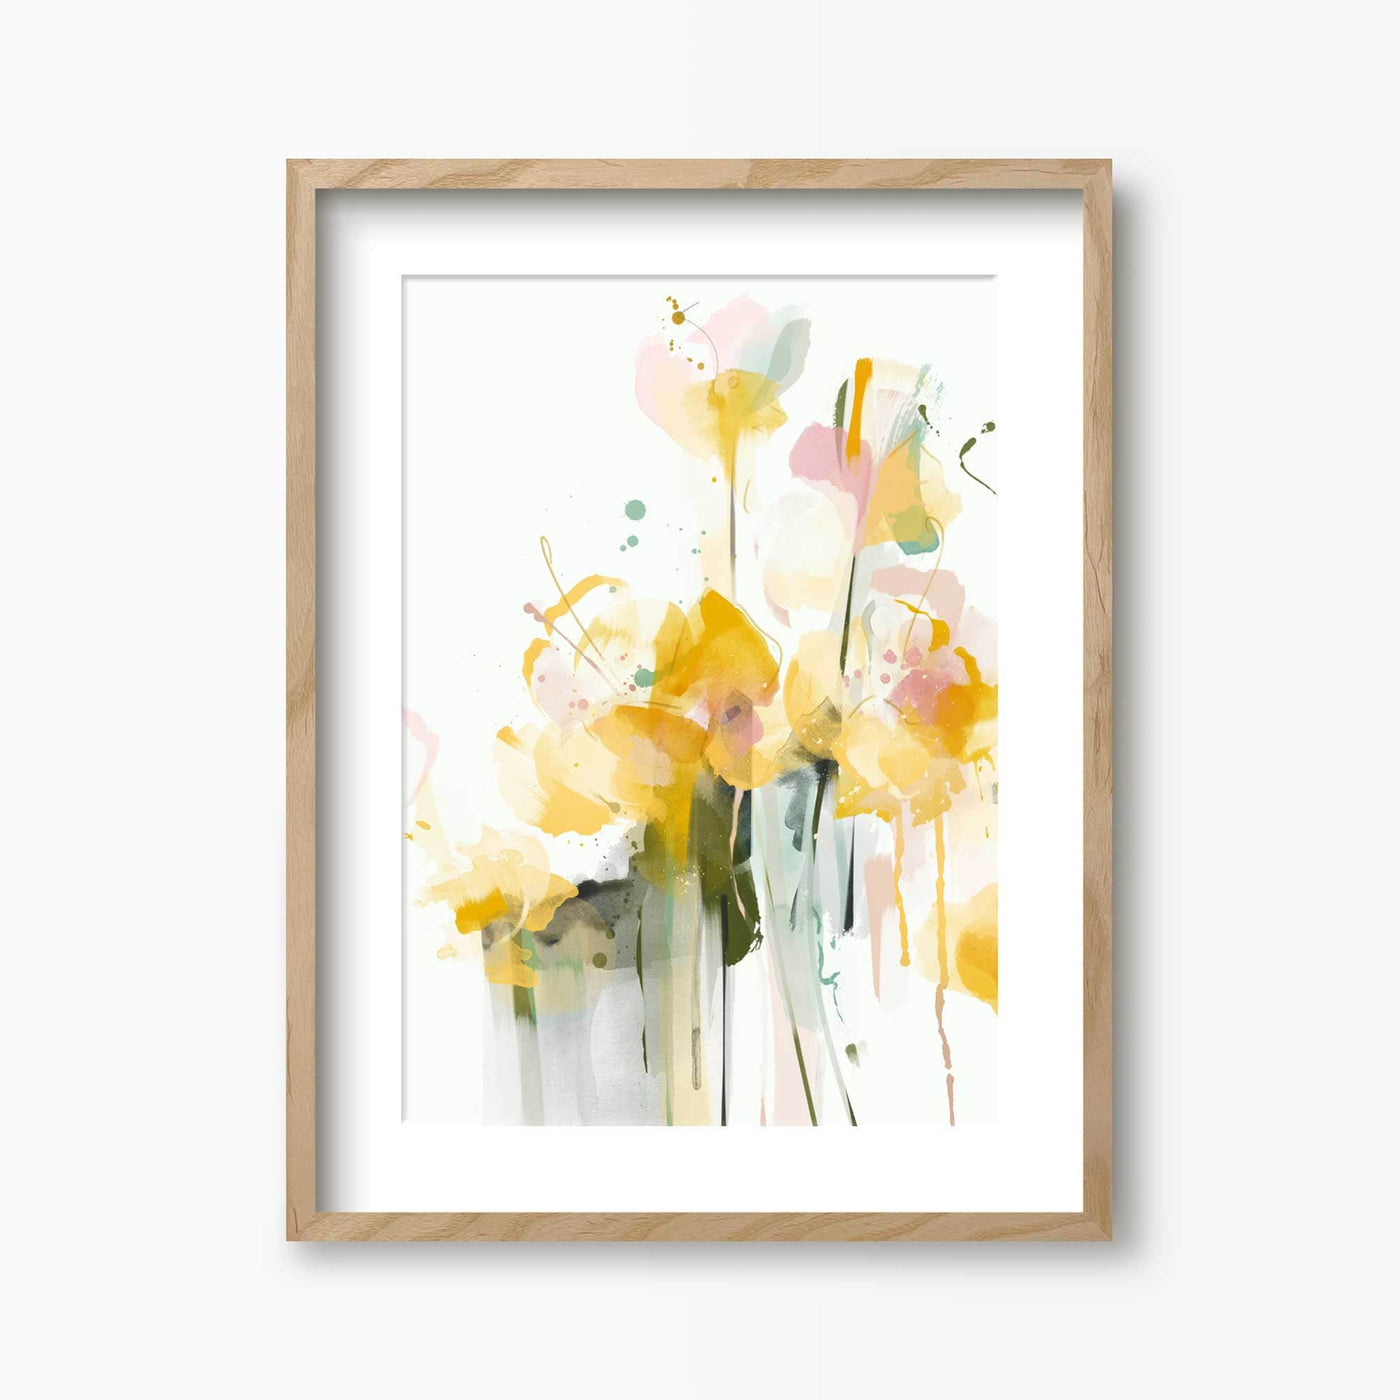 Green Lili 30x40cm (12x16") / Natural Frame + Mount Spring Yellow Abstract Floral Print